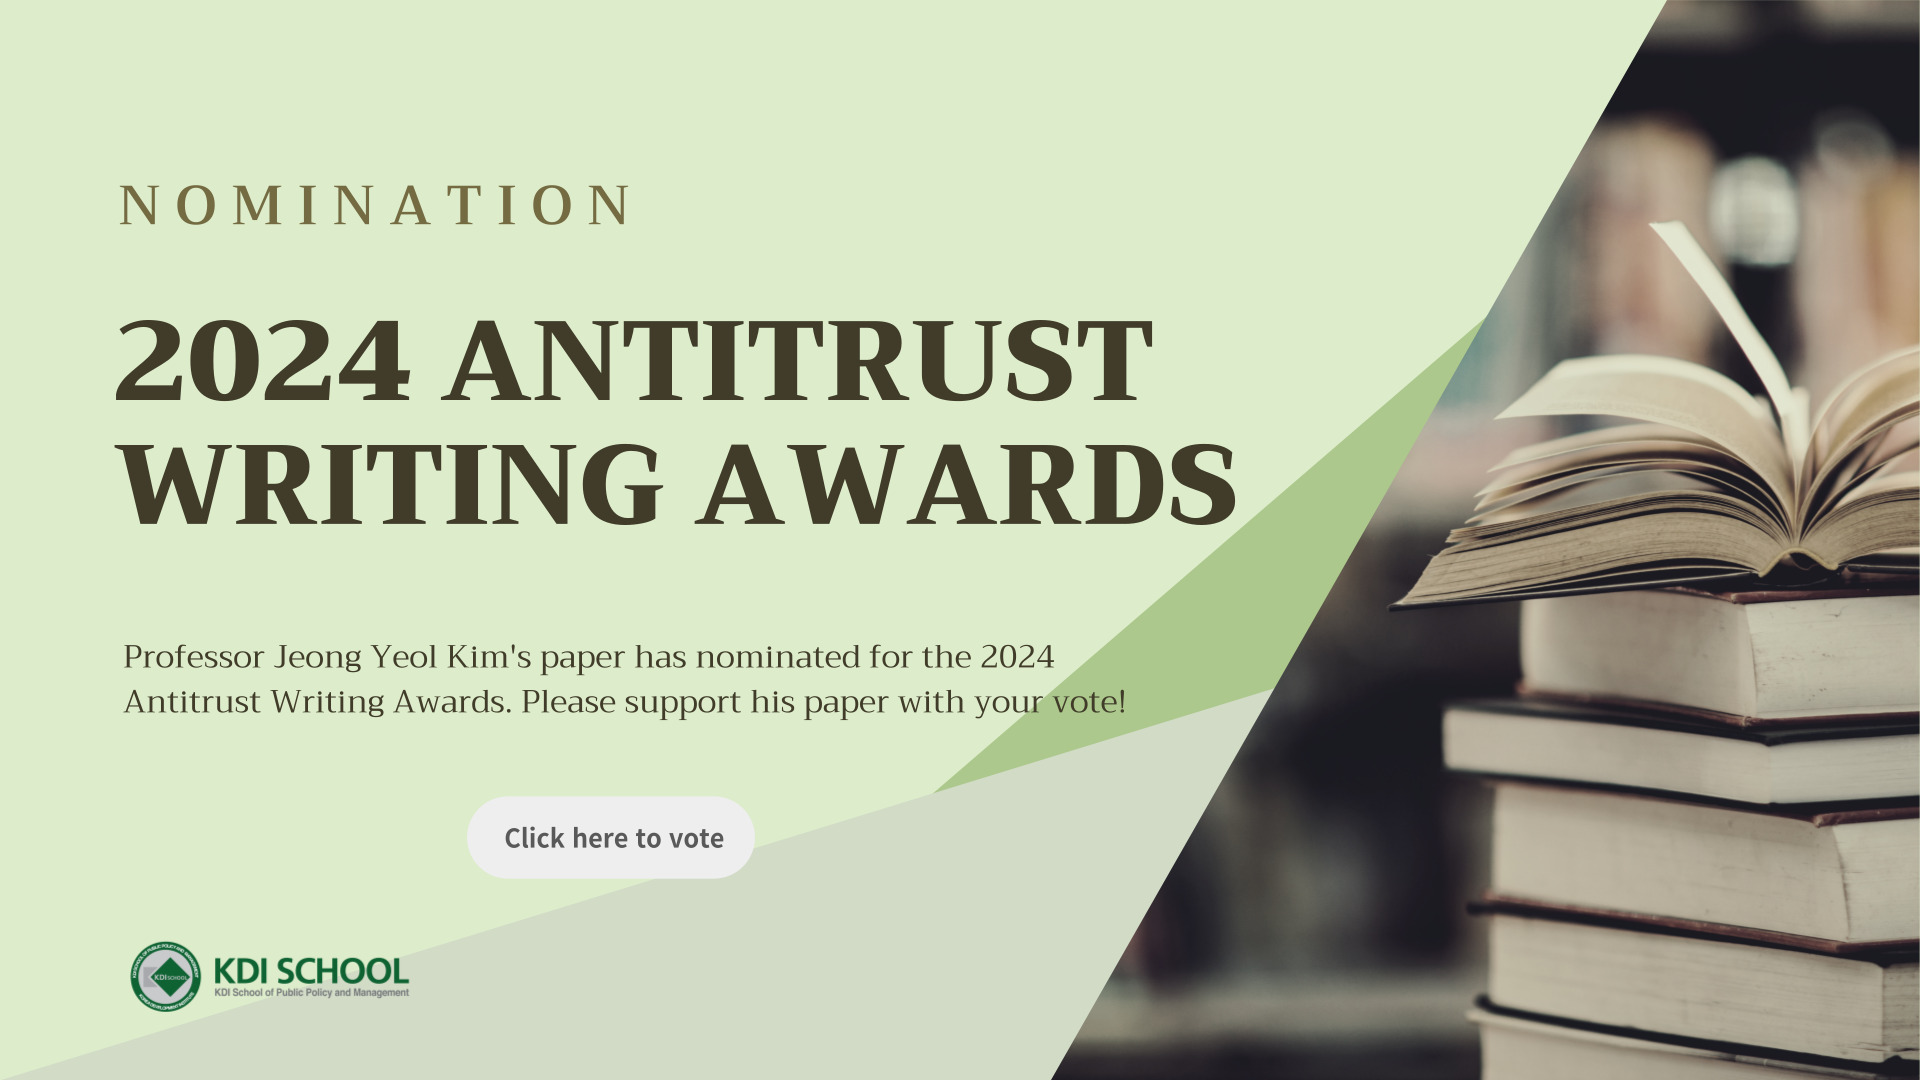 Professor Jeong Yeol Kim's paper about leniency policy was nominated for 2024 Antitrust Writing Awards.